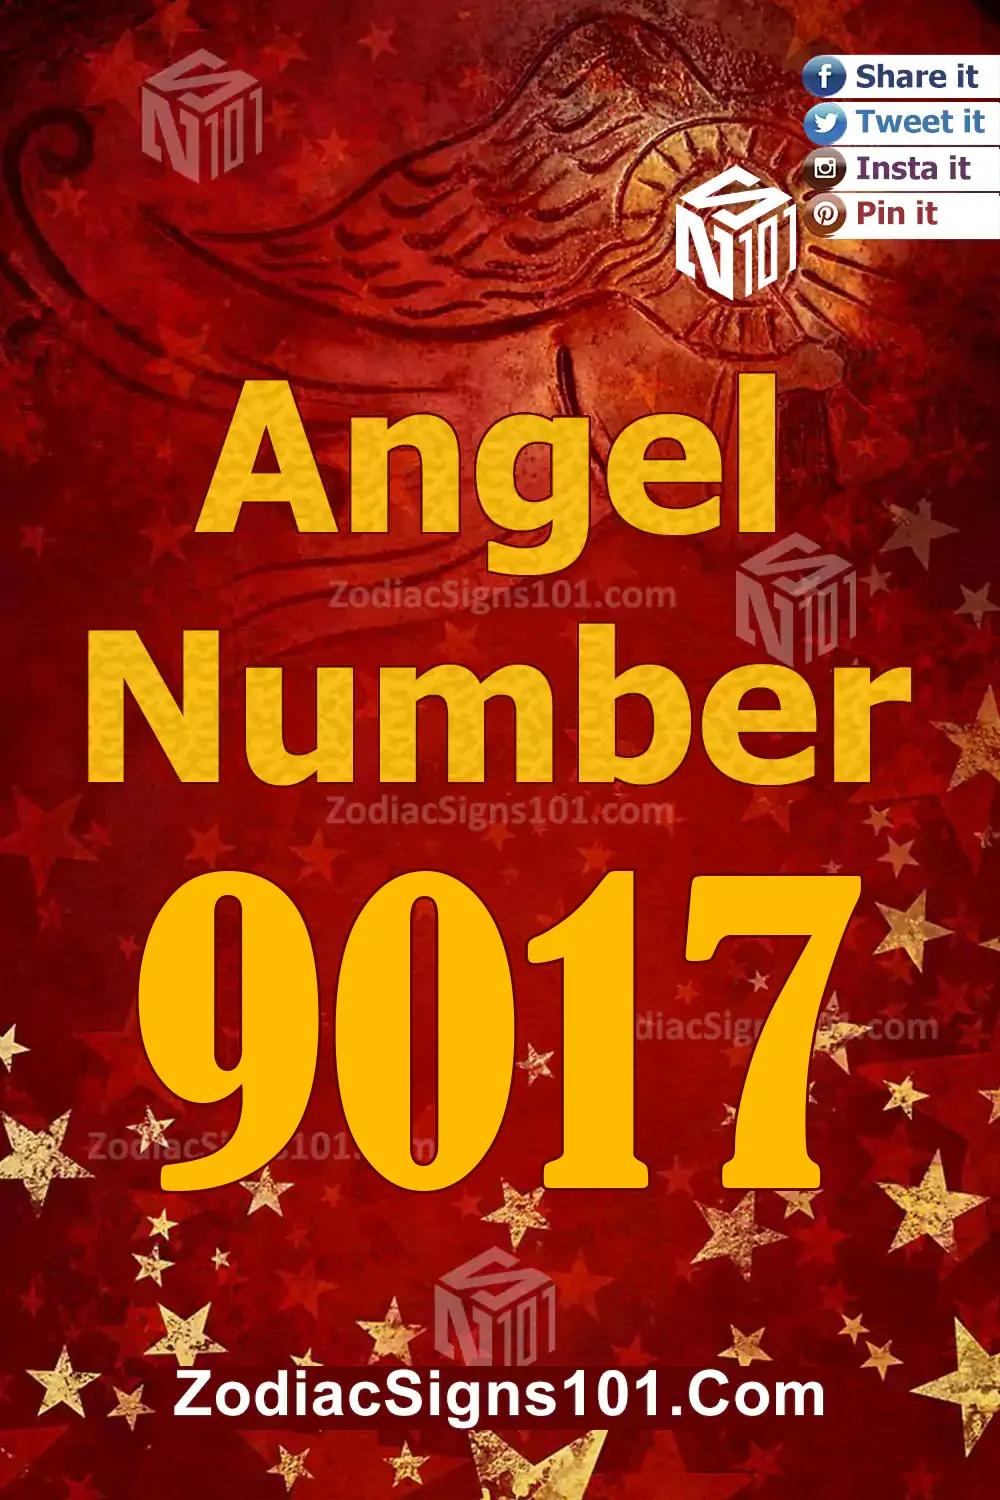 9017 Angel Number Meaning